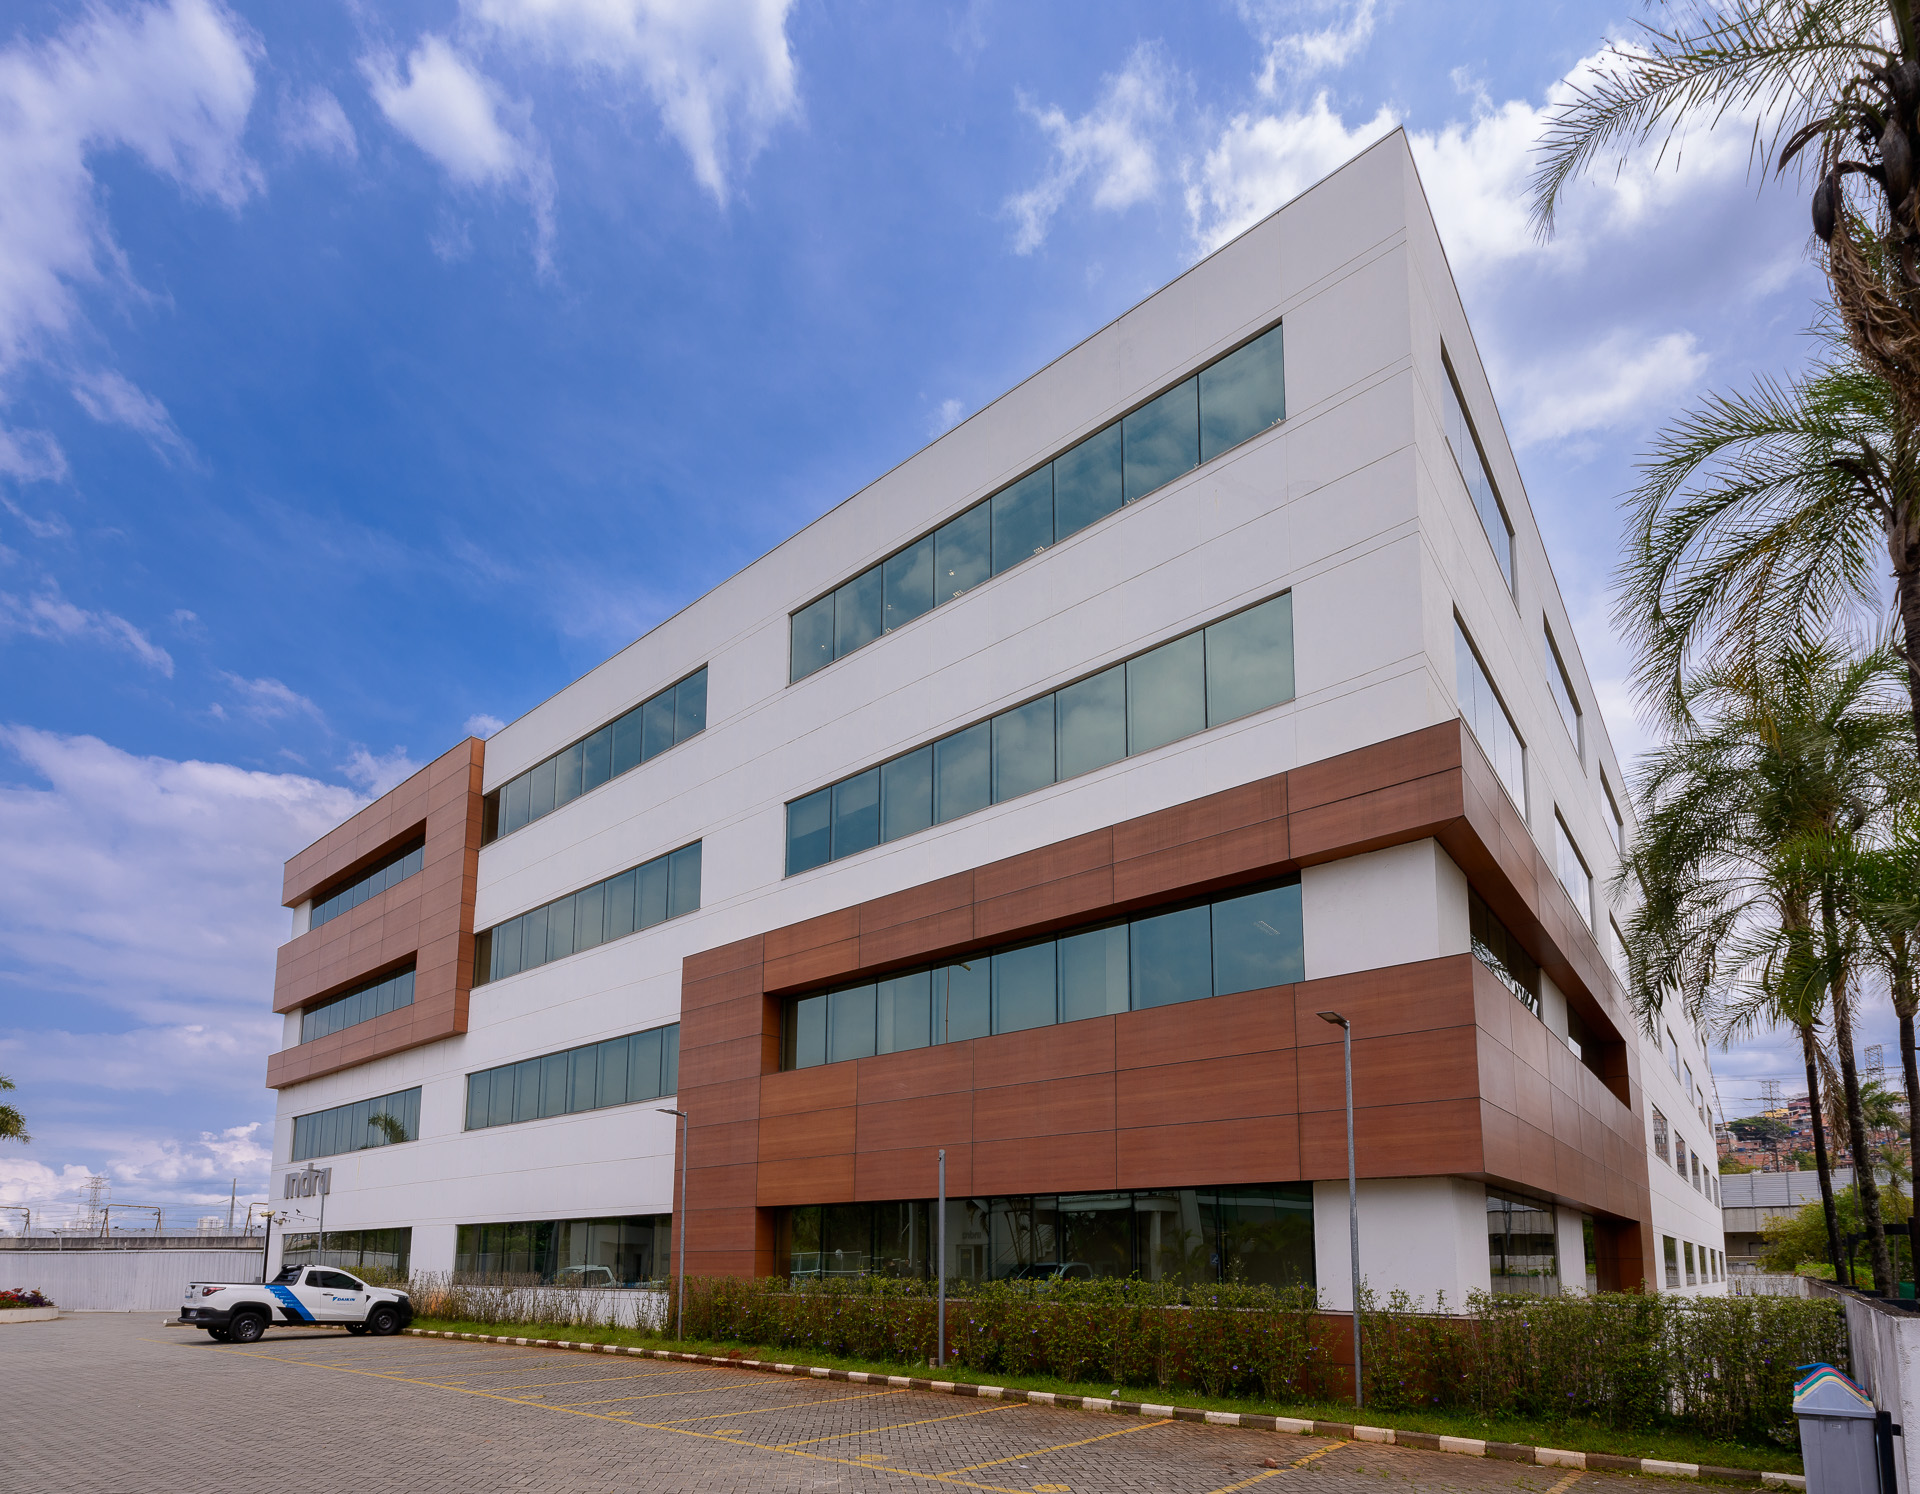 Panamérica Green Park exterior view of white and brick 4 level office building